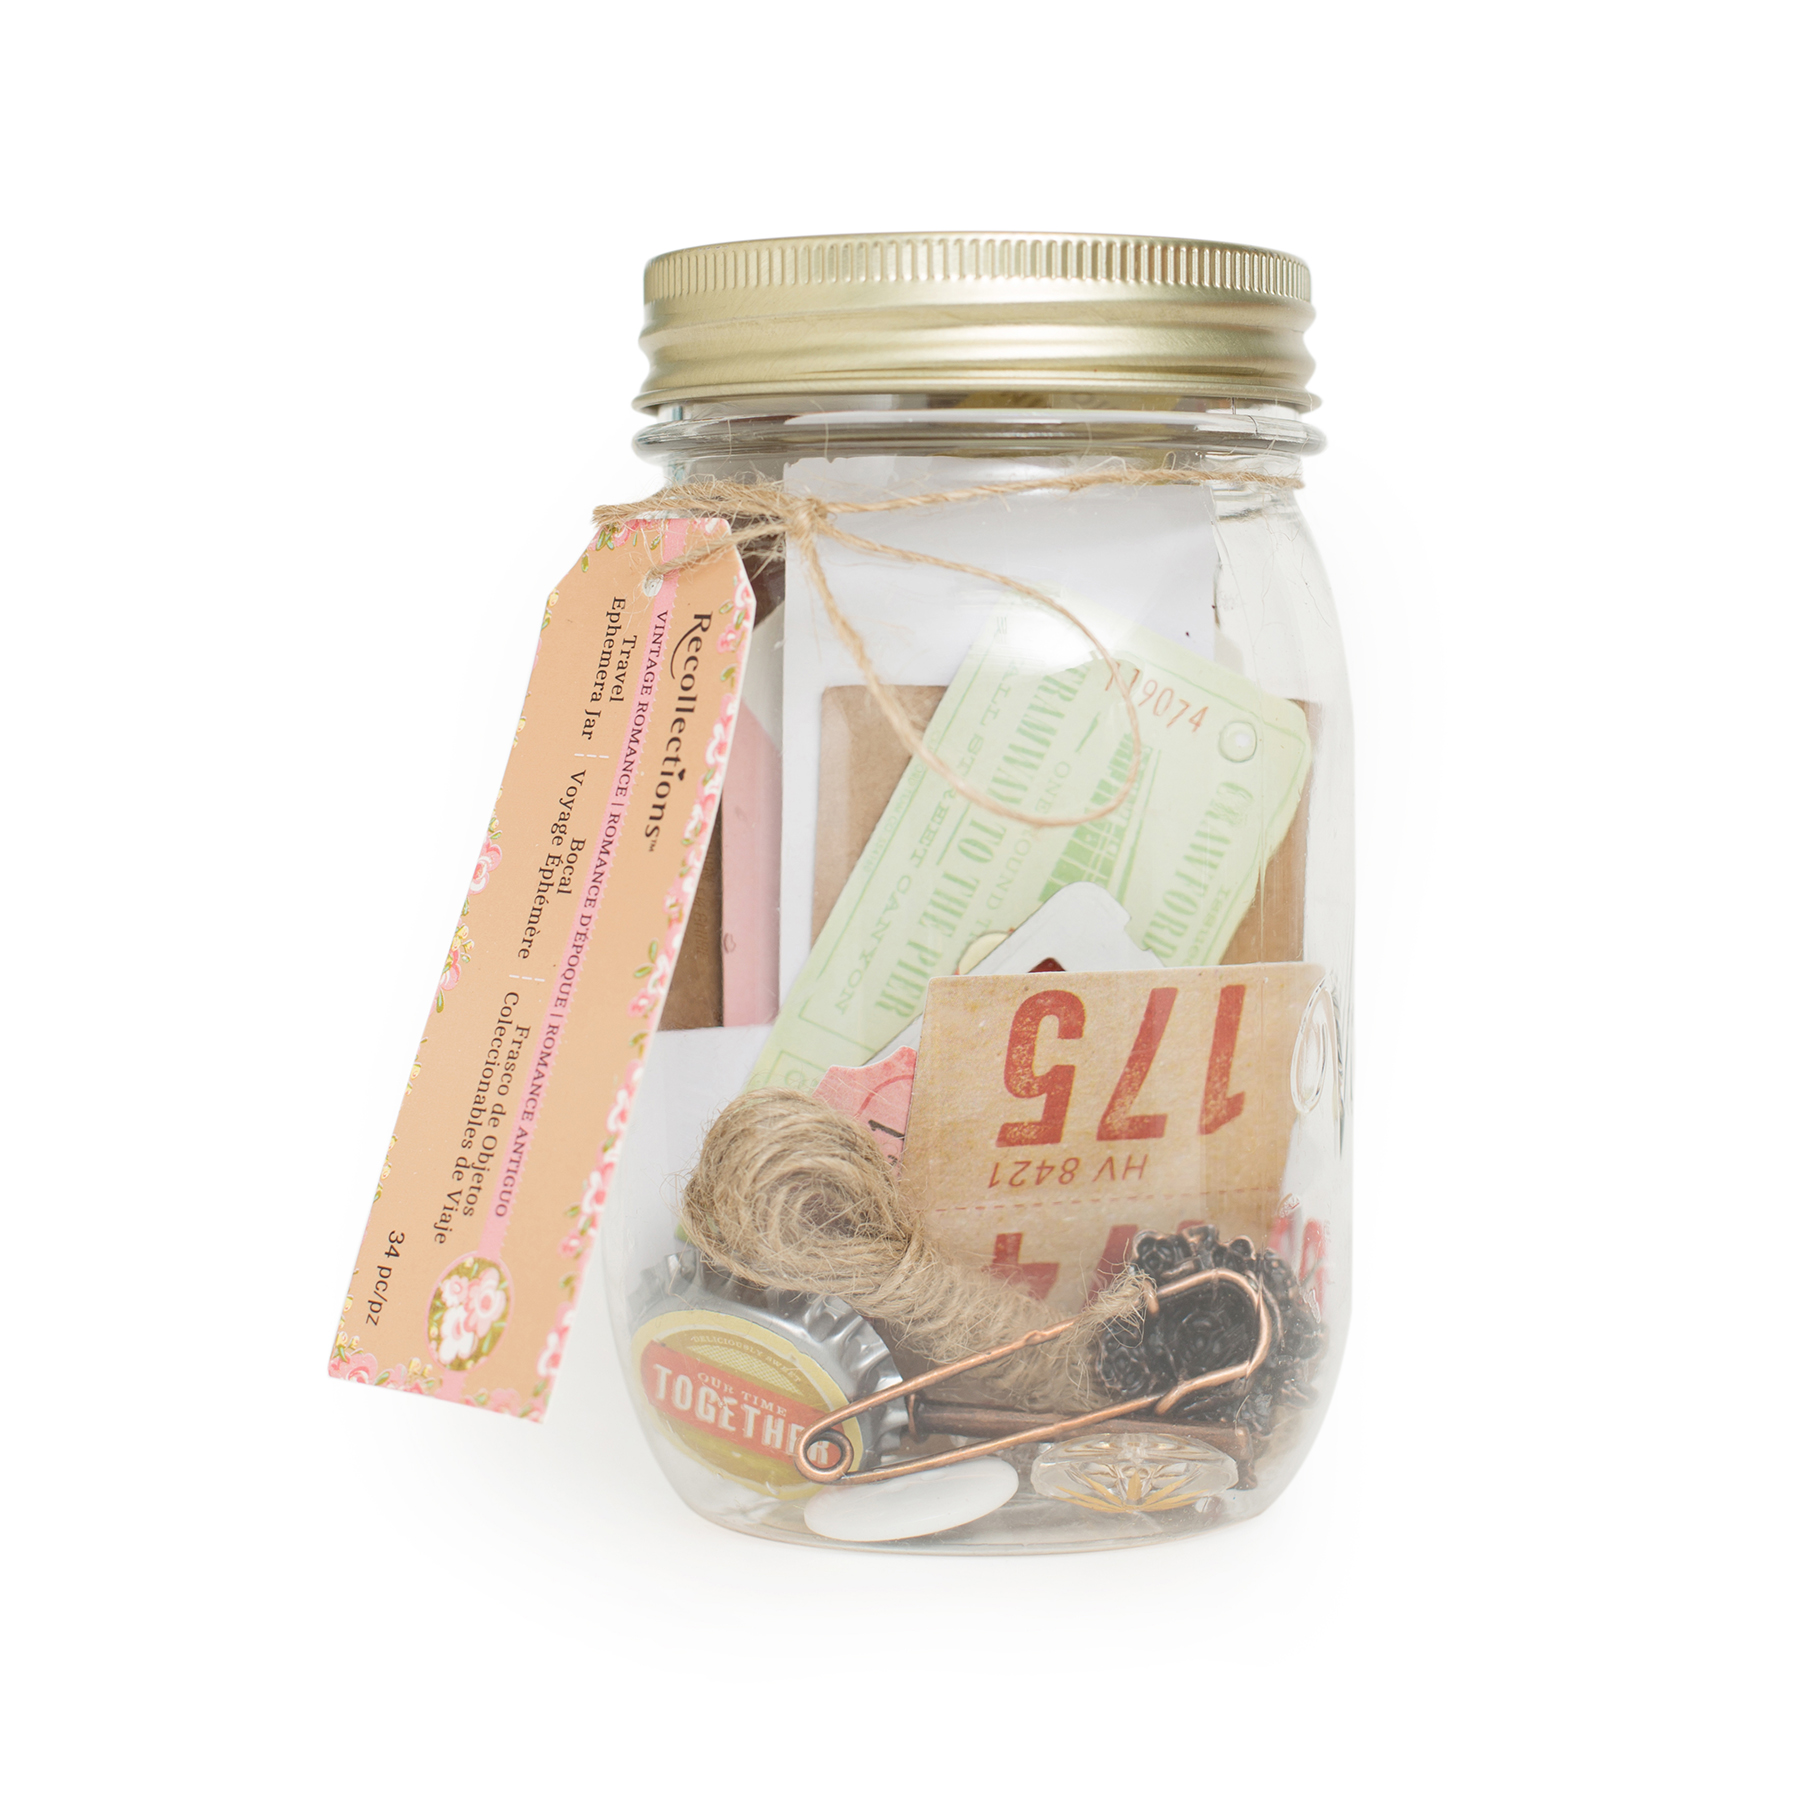 Shop For The Vintage Romance Travel Ephemera Jar By Recollections™ At 